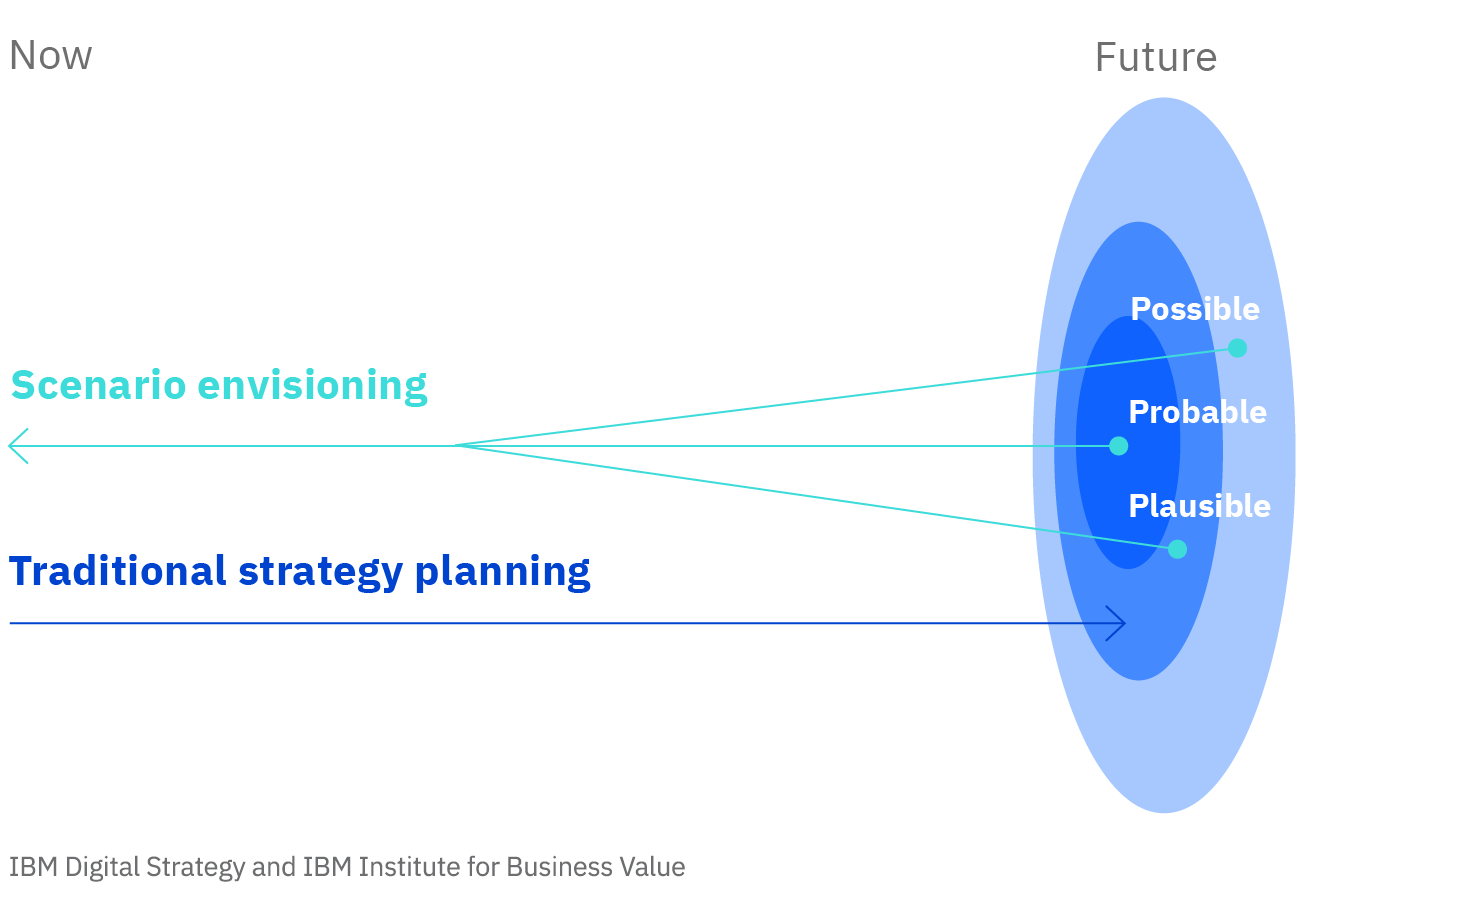 Scenario envisioning allows companies to plan for multiple possible, plausible, and probably outcomes. Traditional strategy planning only looks toward a single outcome.